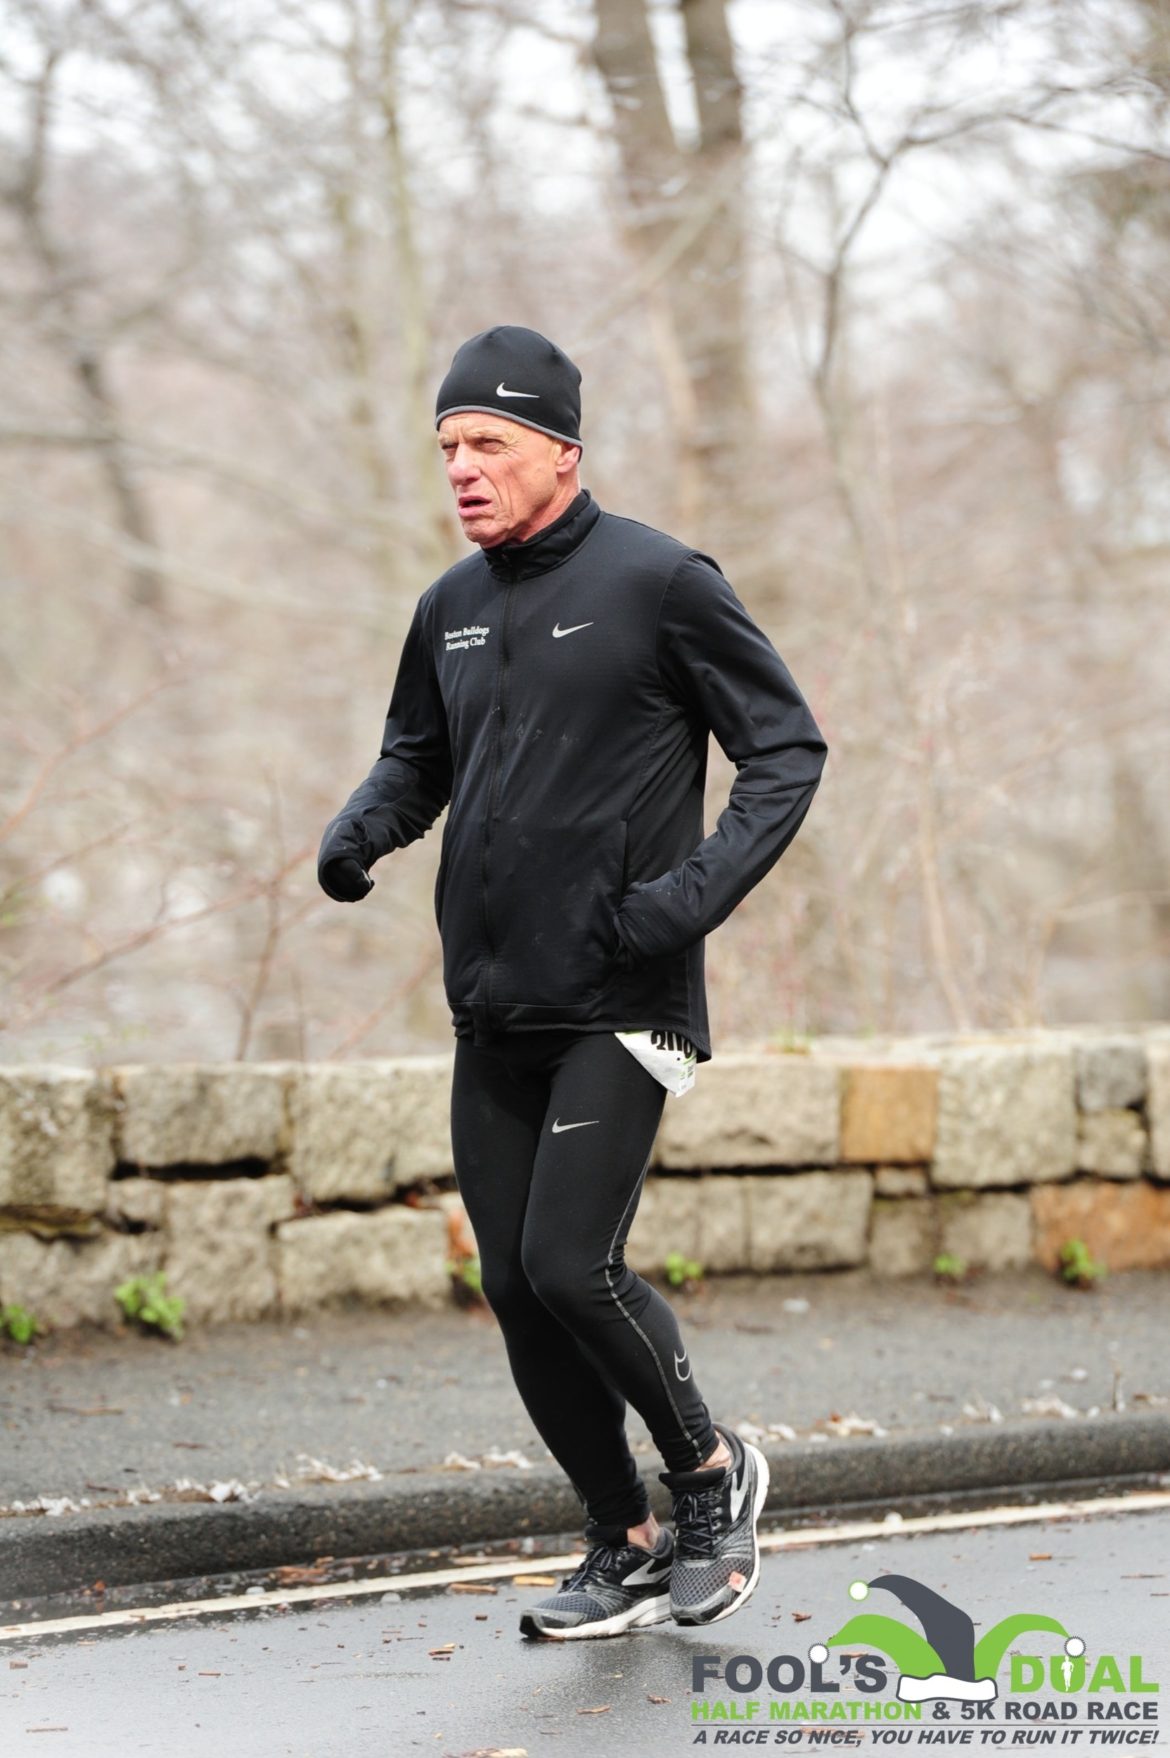 Mike Ferullo found running helped him with his addiction recovery, and started the Boston Bulldogs. He also worked at Watertown High School for 25 years.